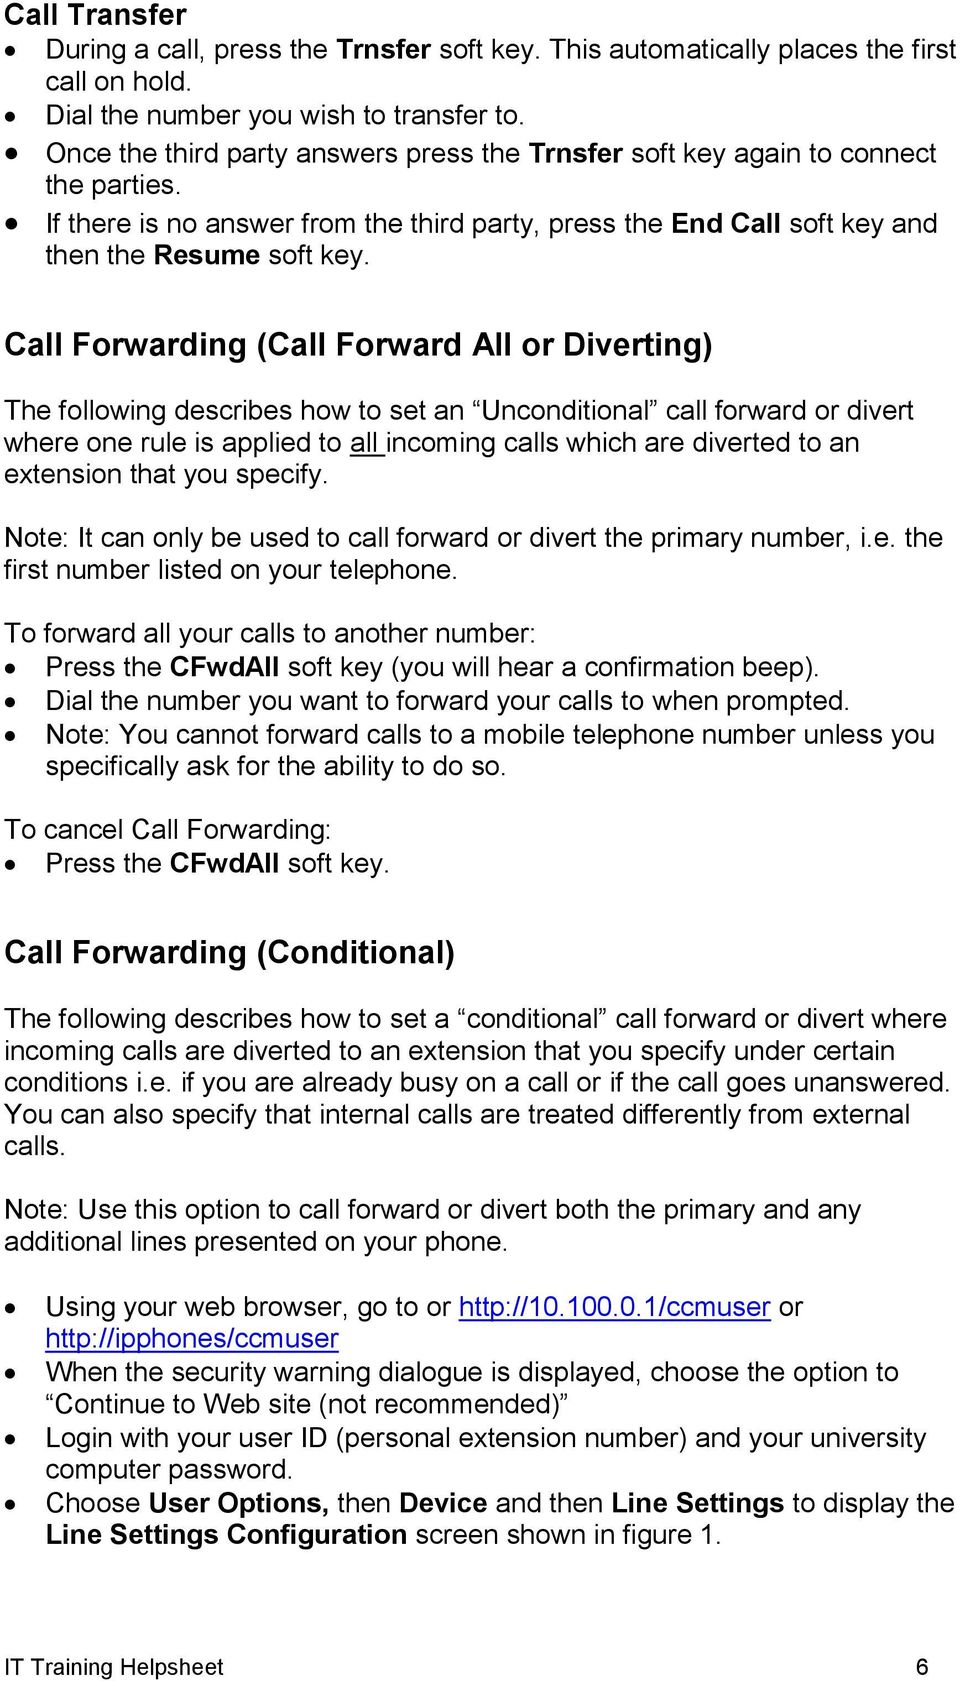 Call Forwarding (Call Forward All or Diverting) The following describes how to set an Unconditional call forward or divert where one rule is applied to all incoming calls which are diverted to an